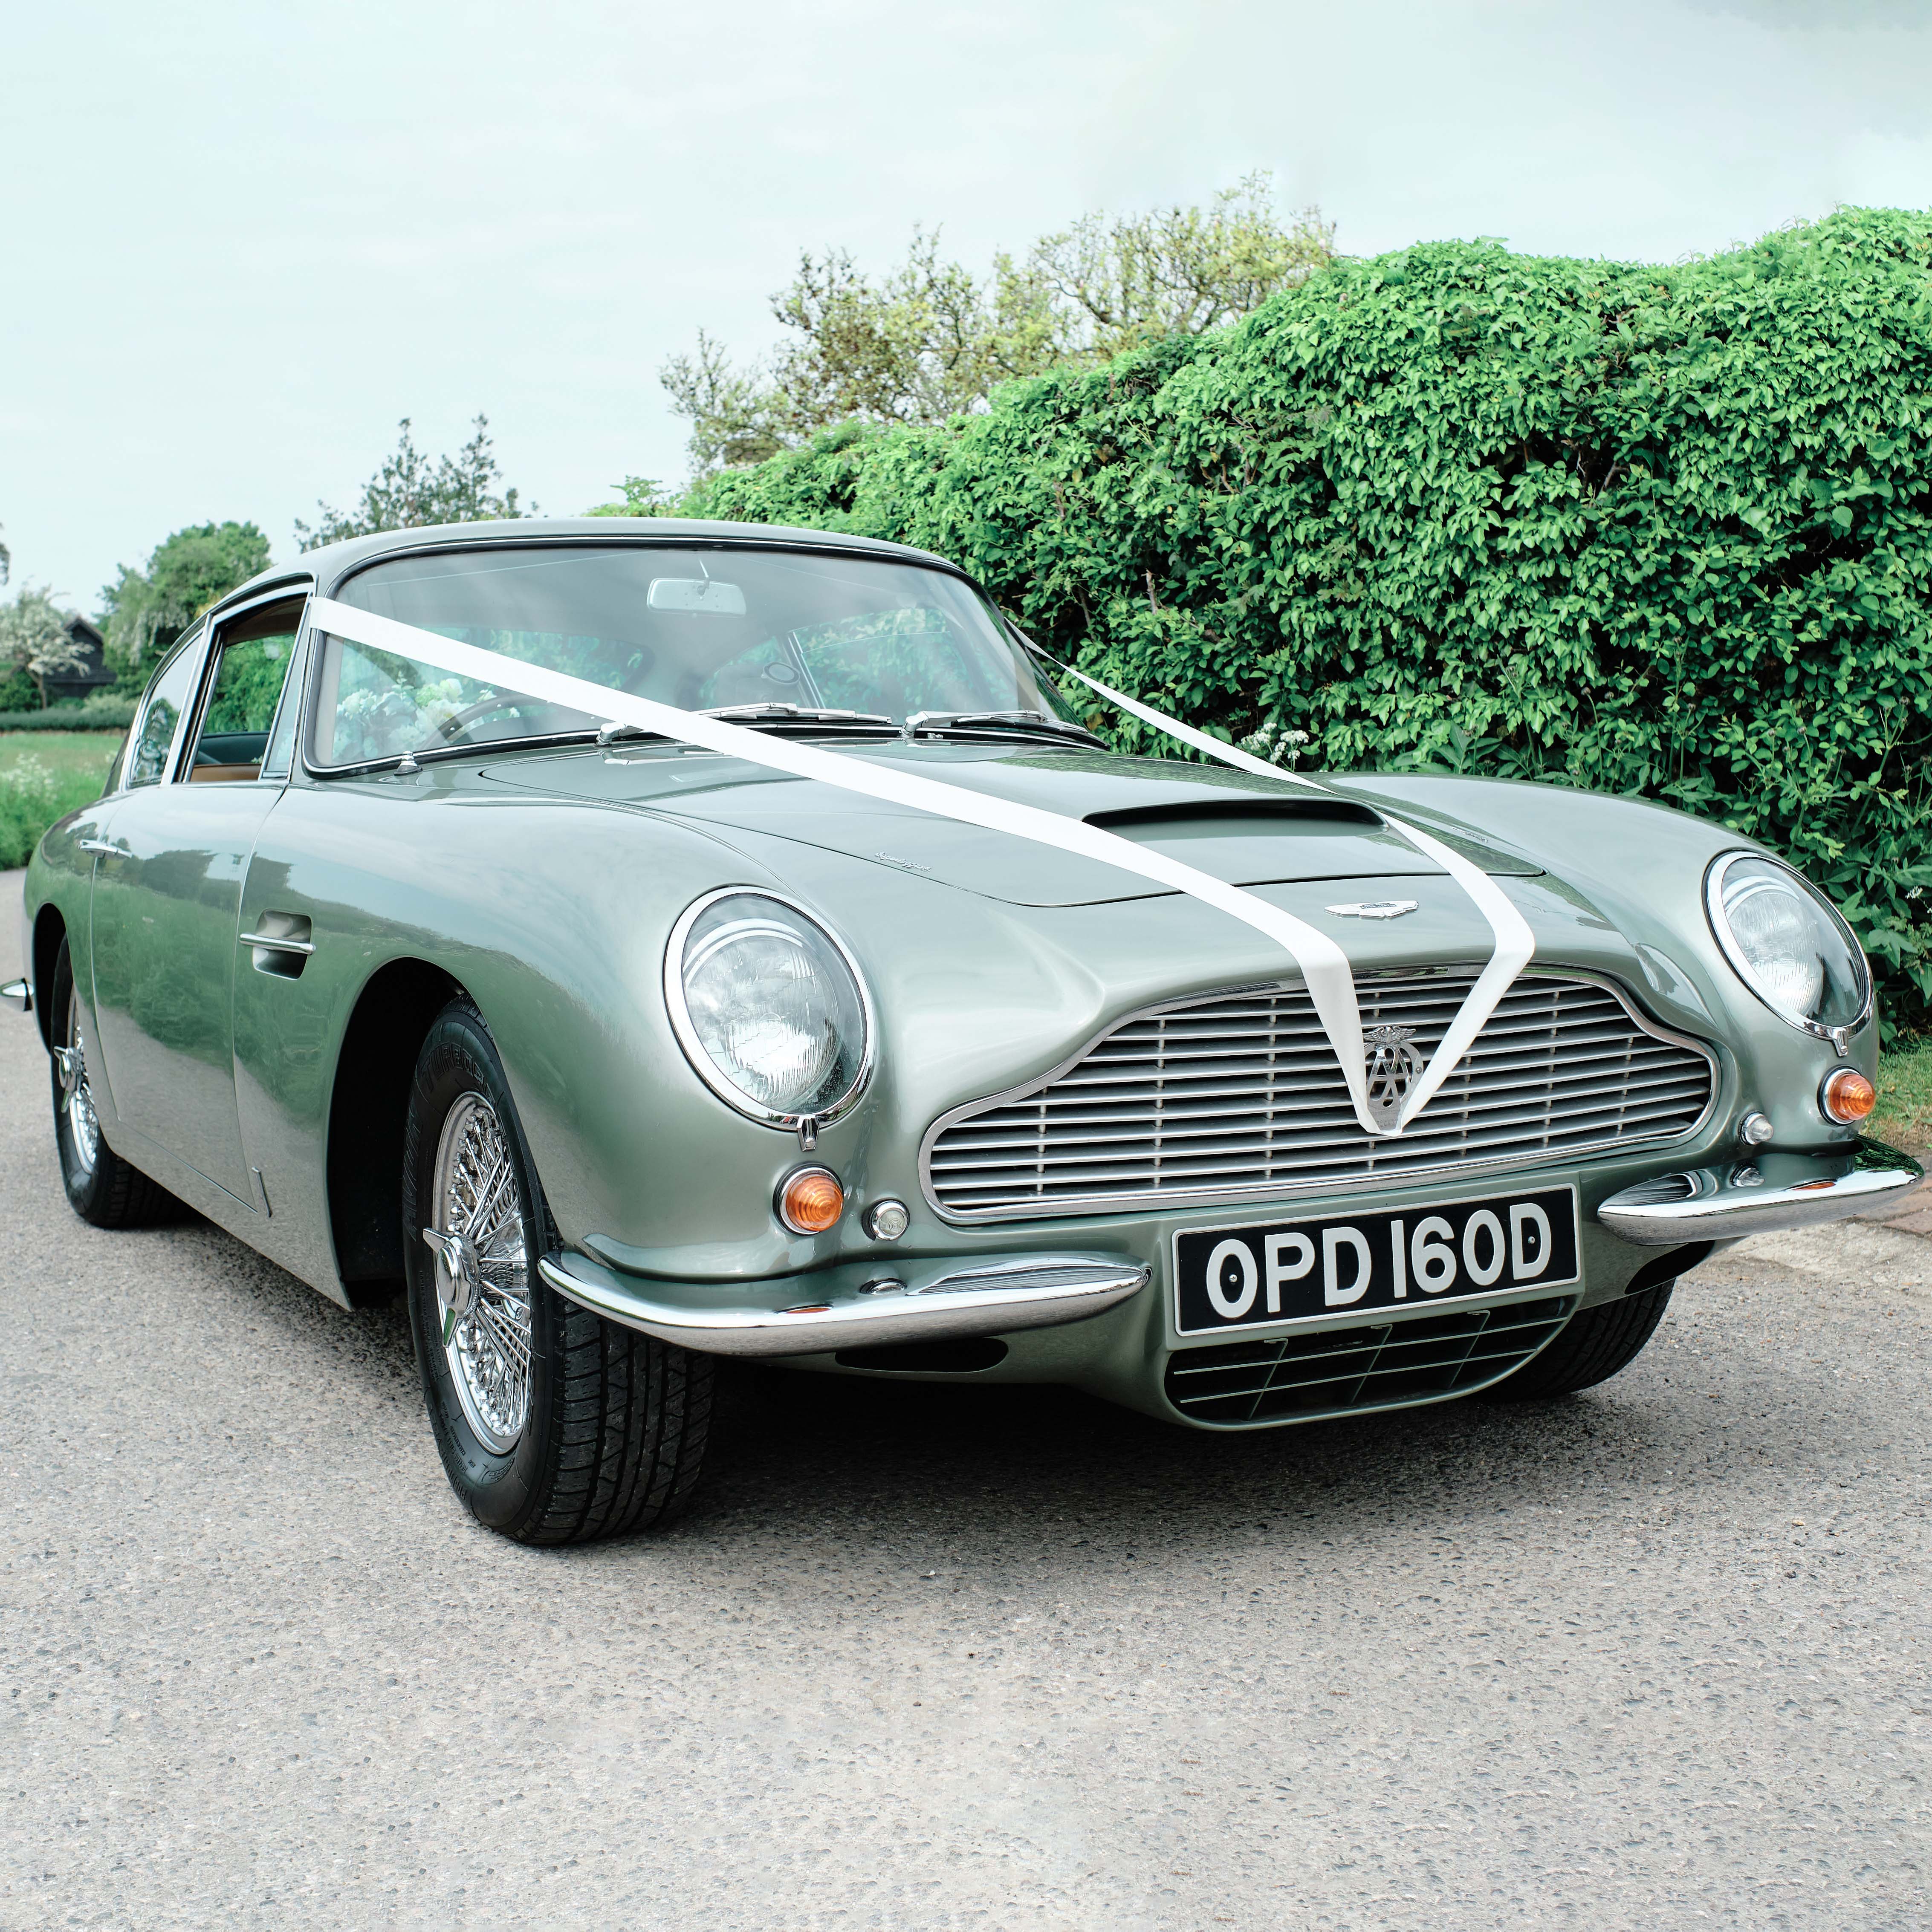 Classic Aston Martin DB6 in Metallic Green decorated with white ribbons.